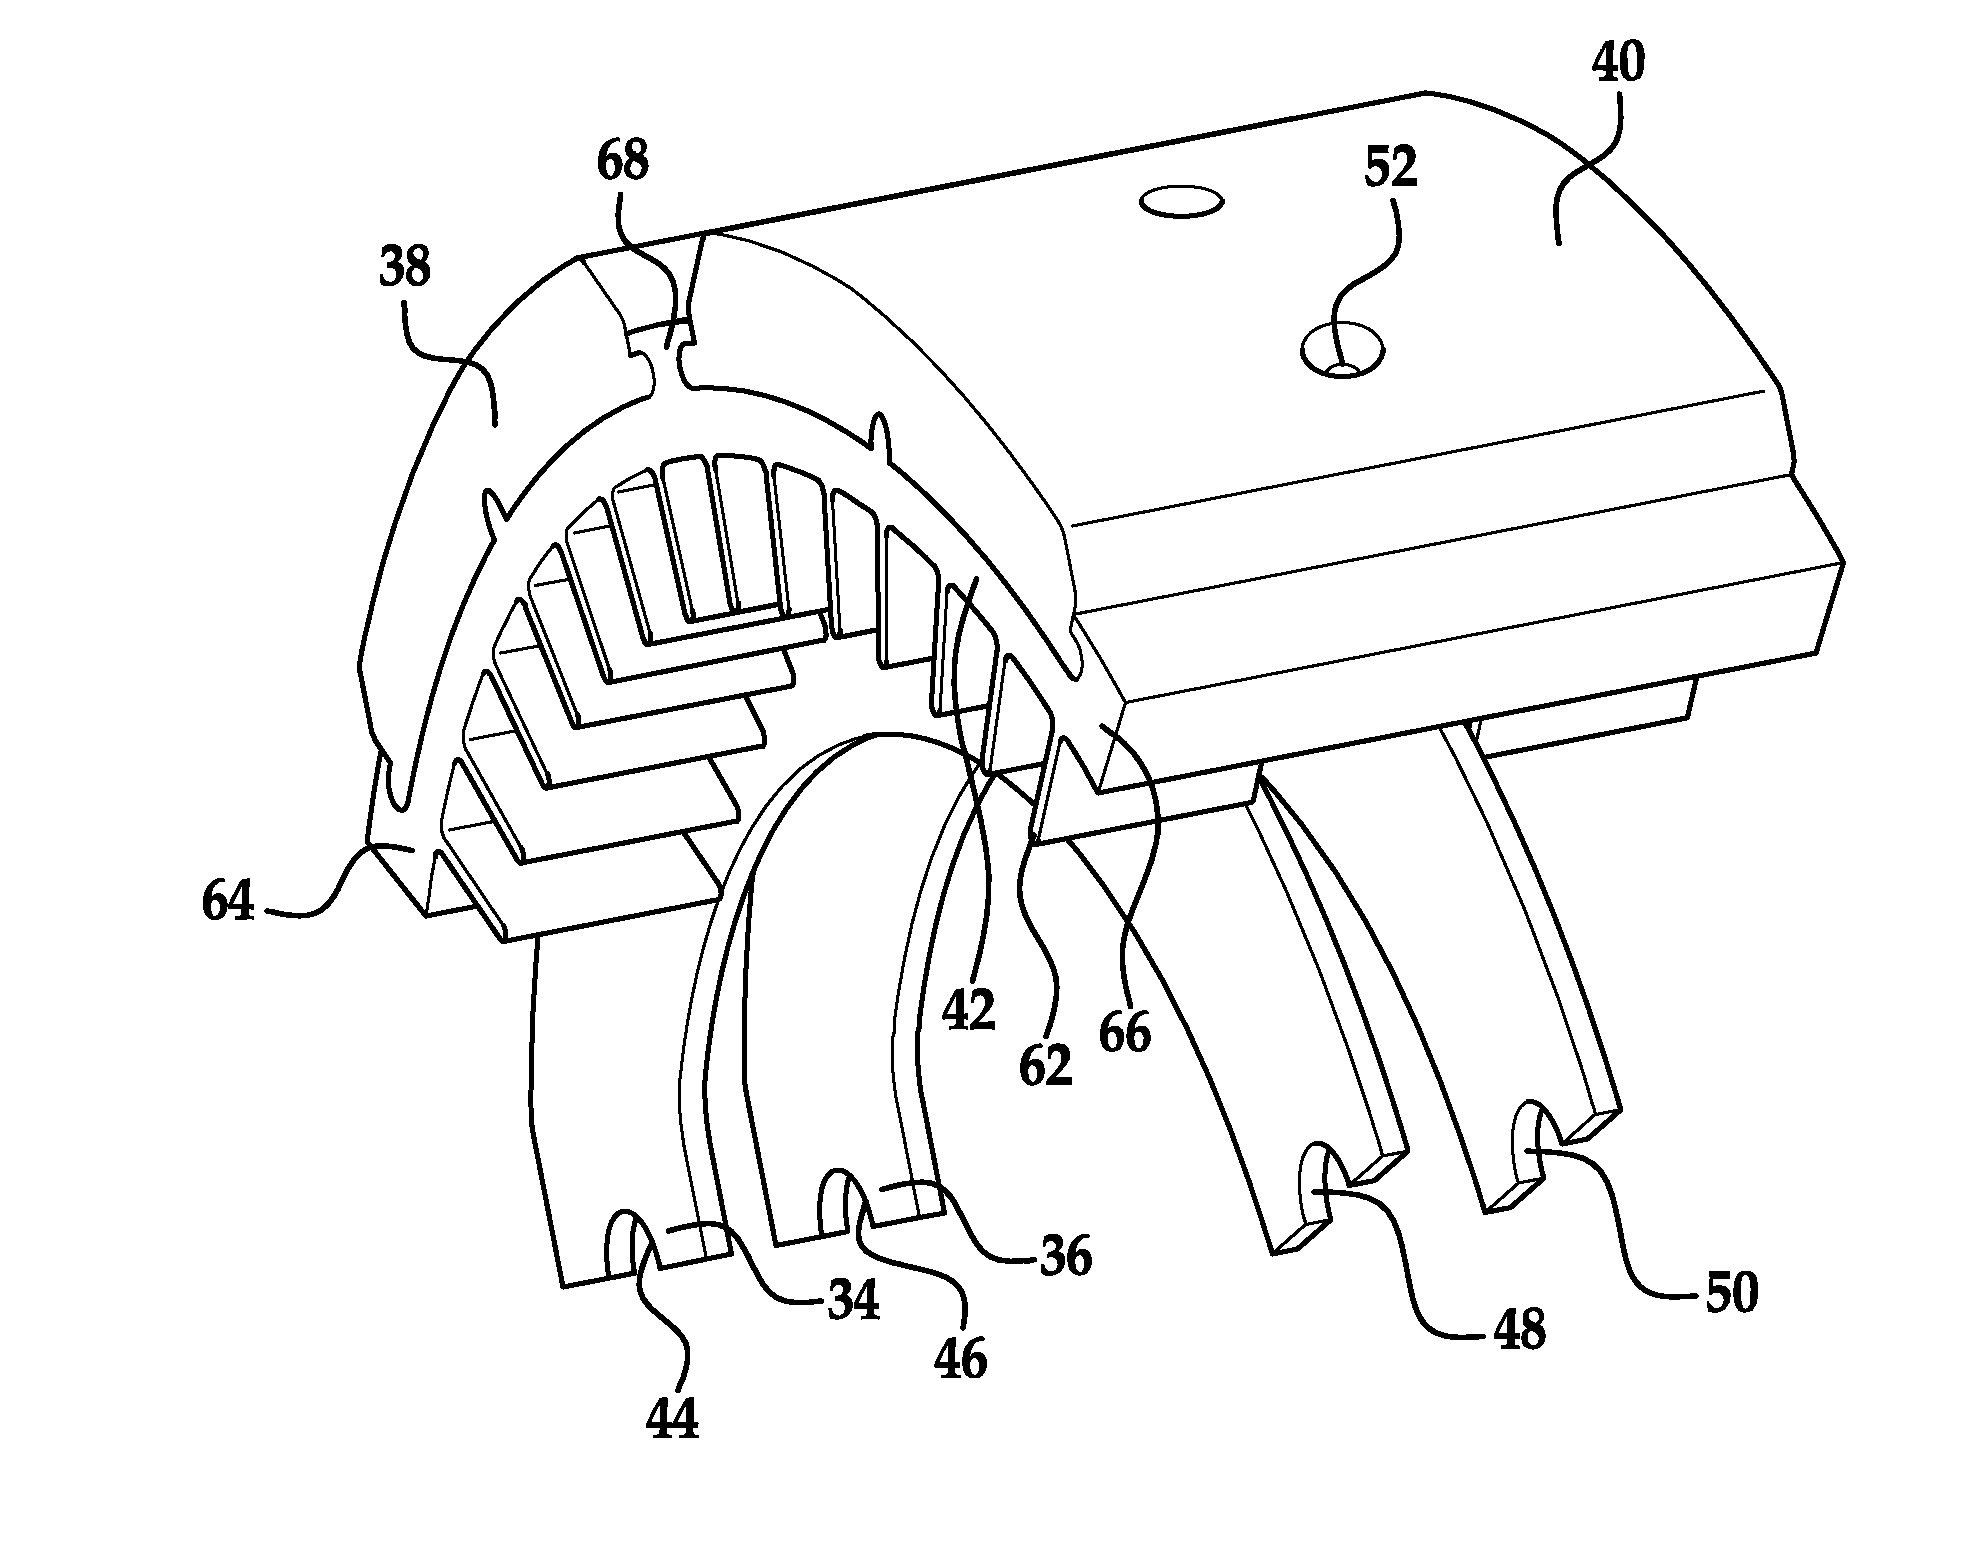 Extruded table for a brake shoe